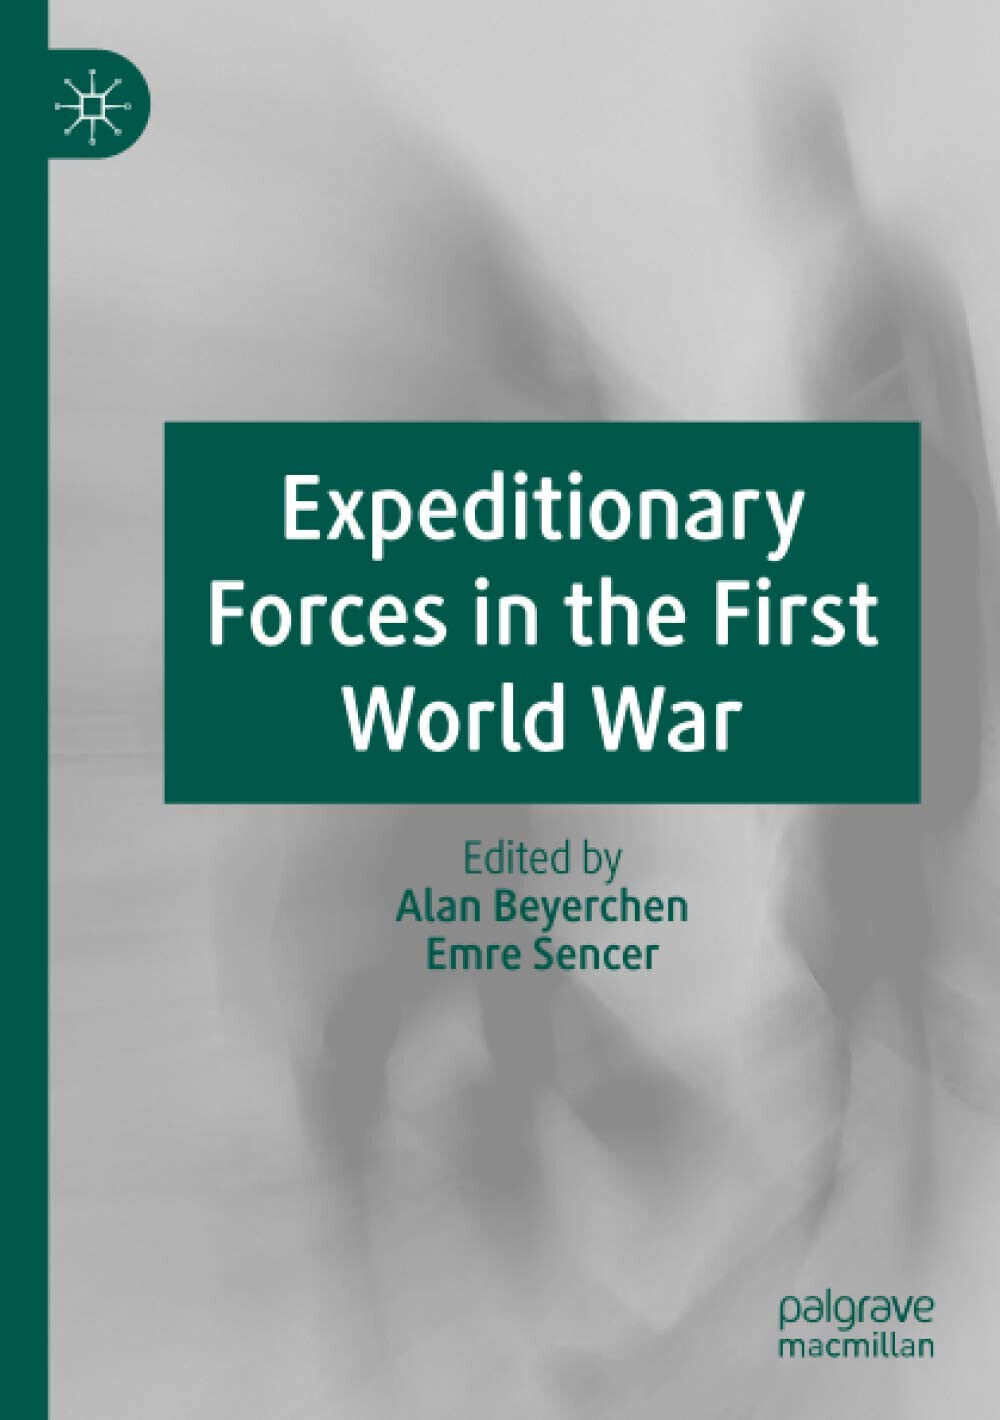 Expeditionary Forces in the First World War - Alan Beyerchen - palgrave, 2020